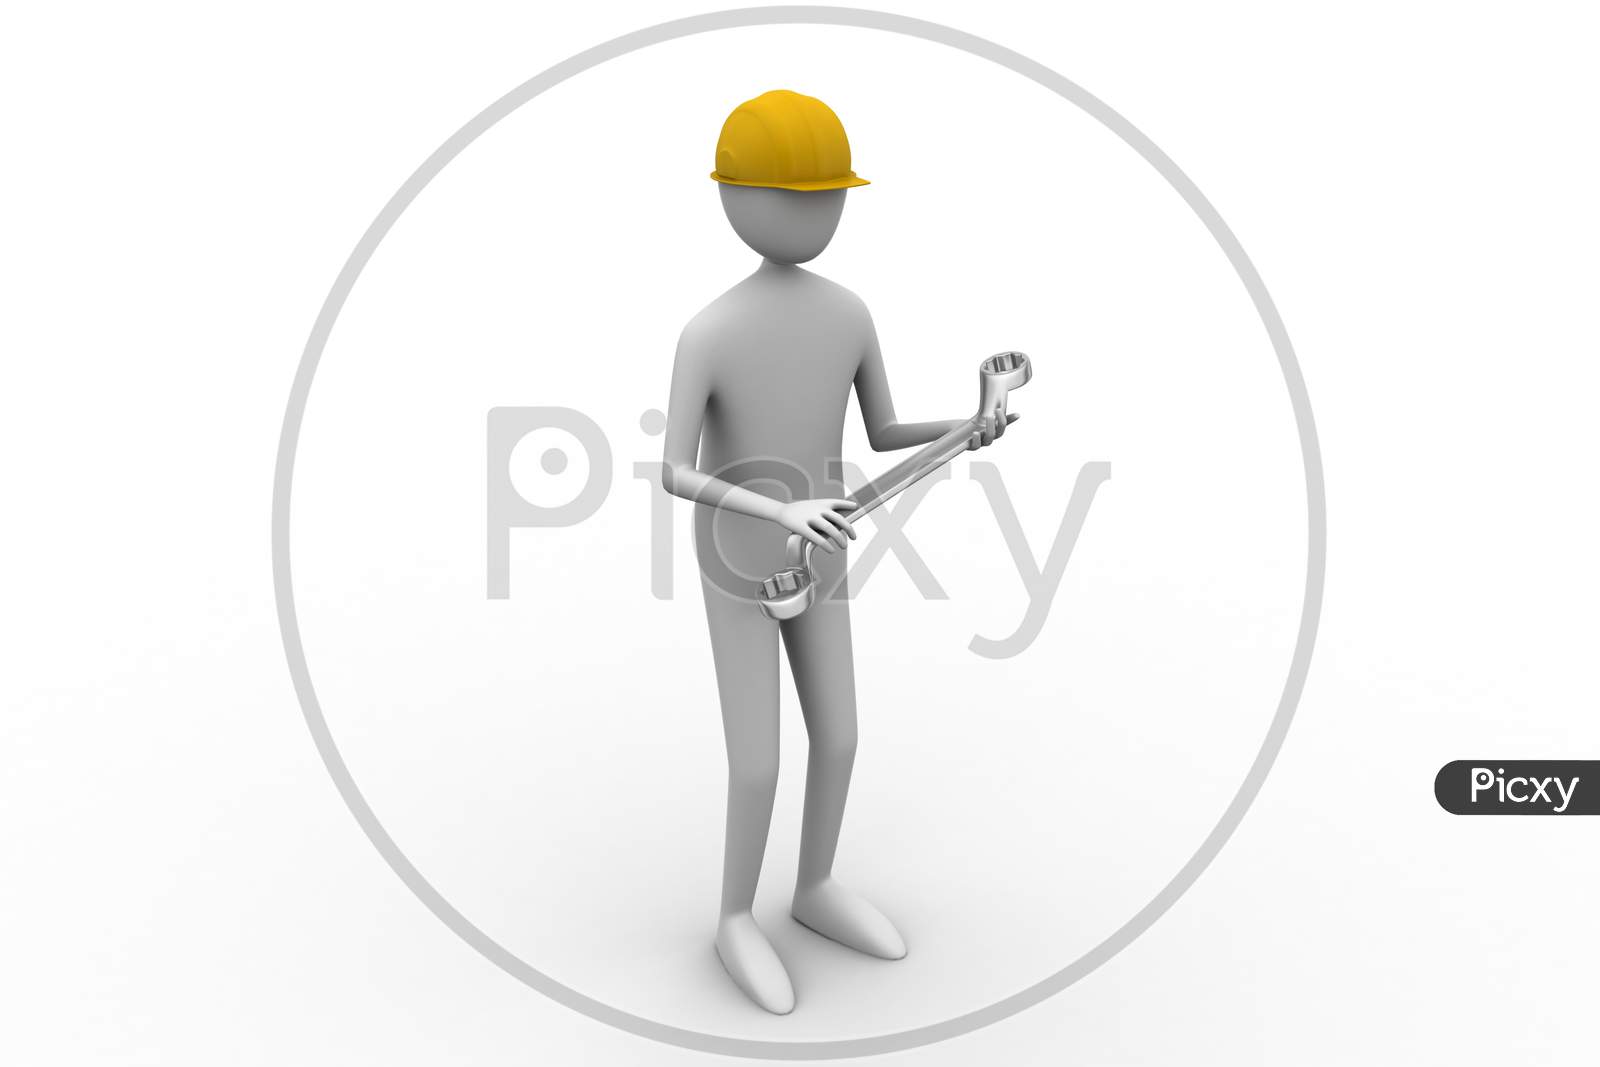 3D Man With Wrench